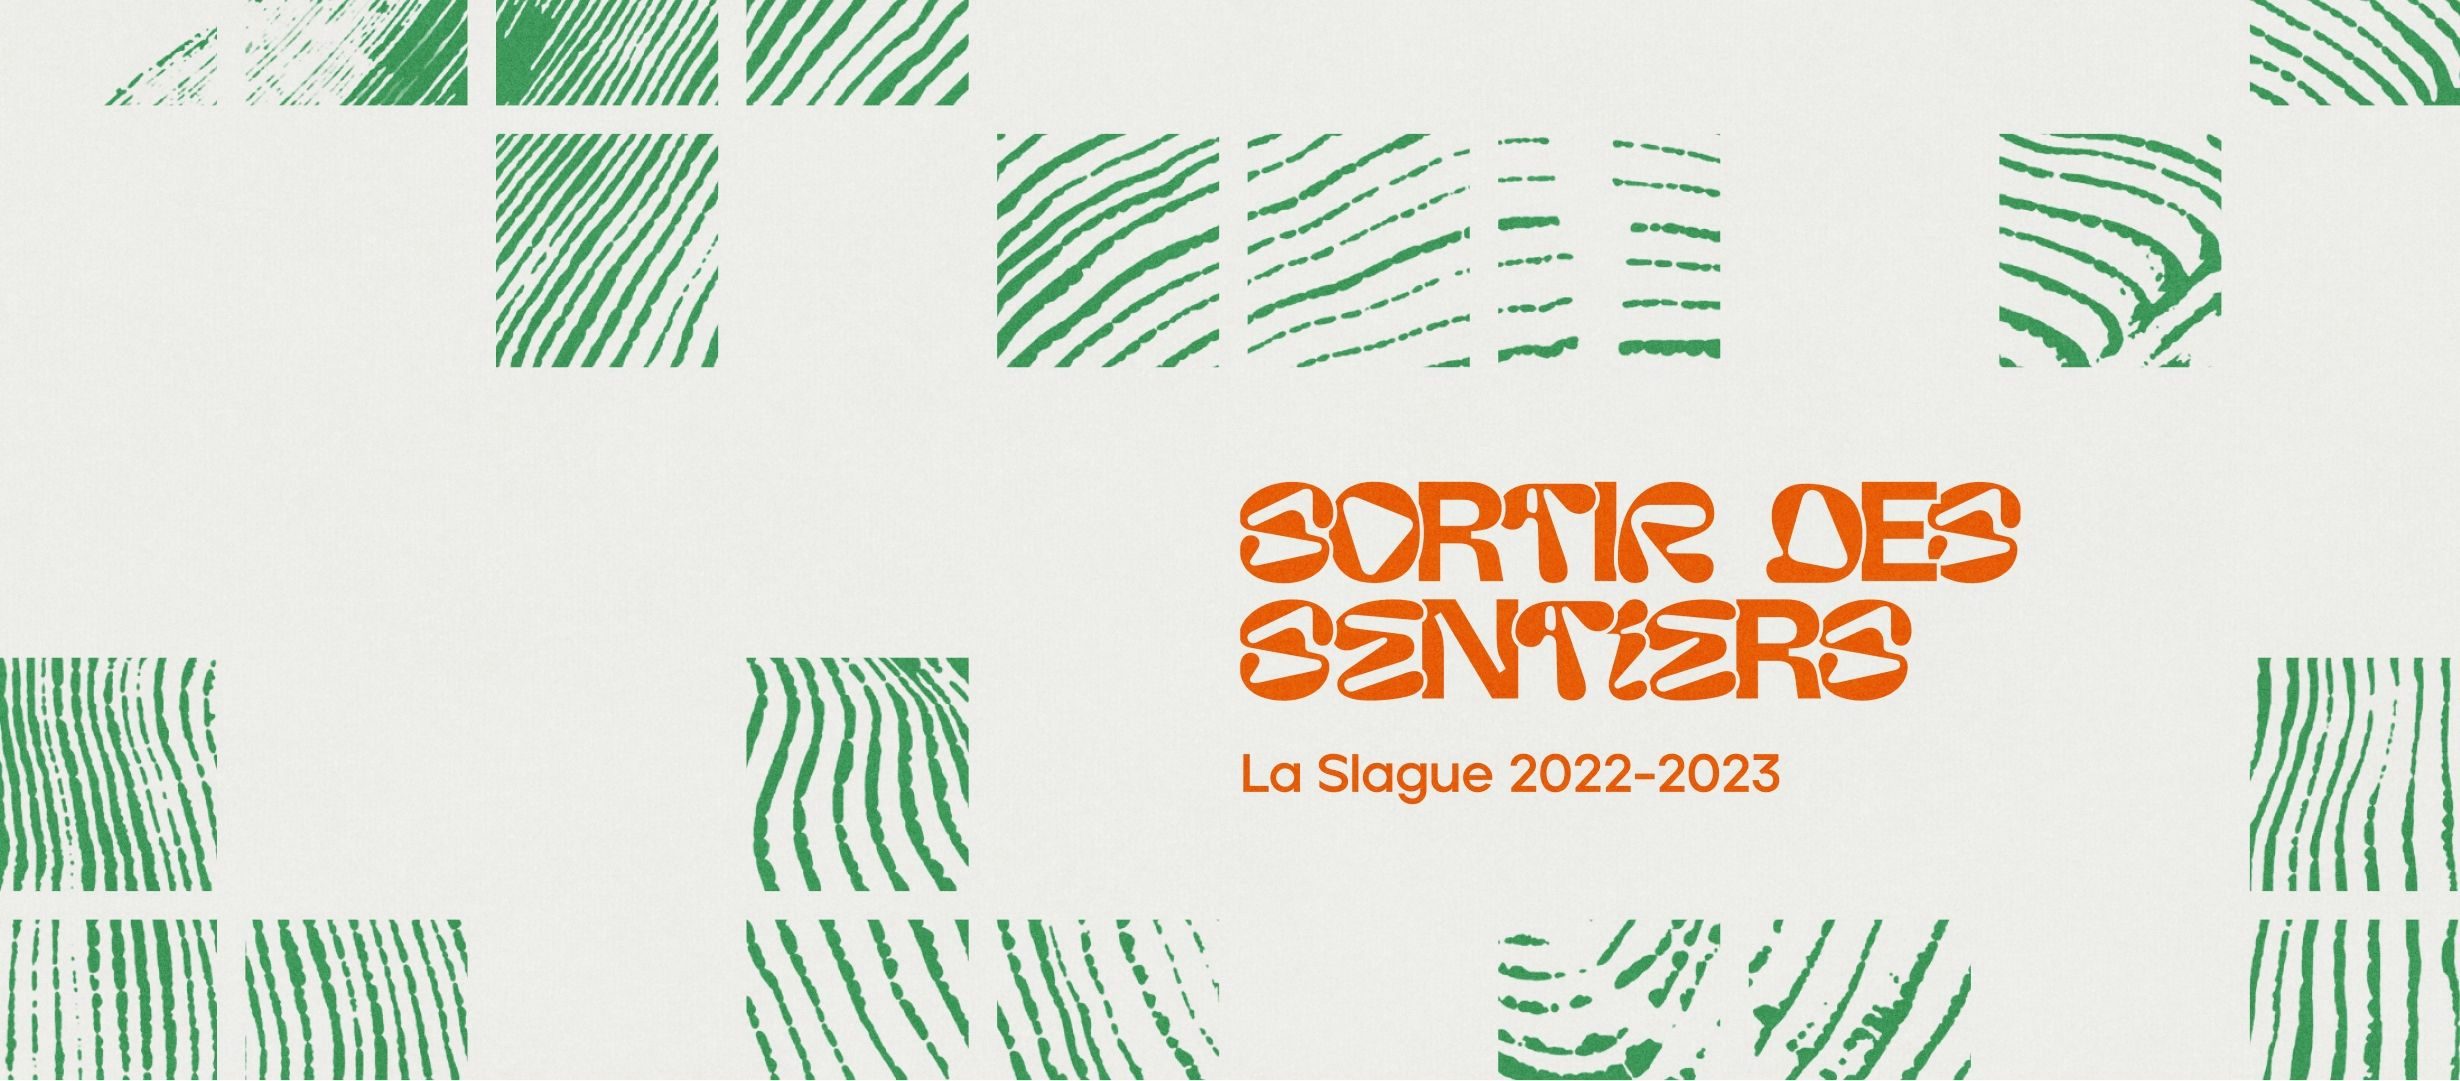 Branded timeline image for La Slague's 2021-2022 season with woodblock tree ring stamps